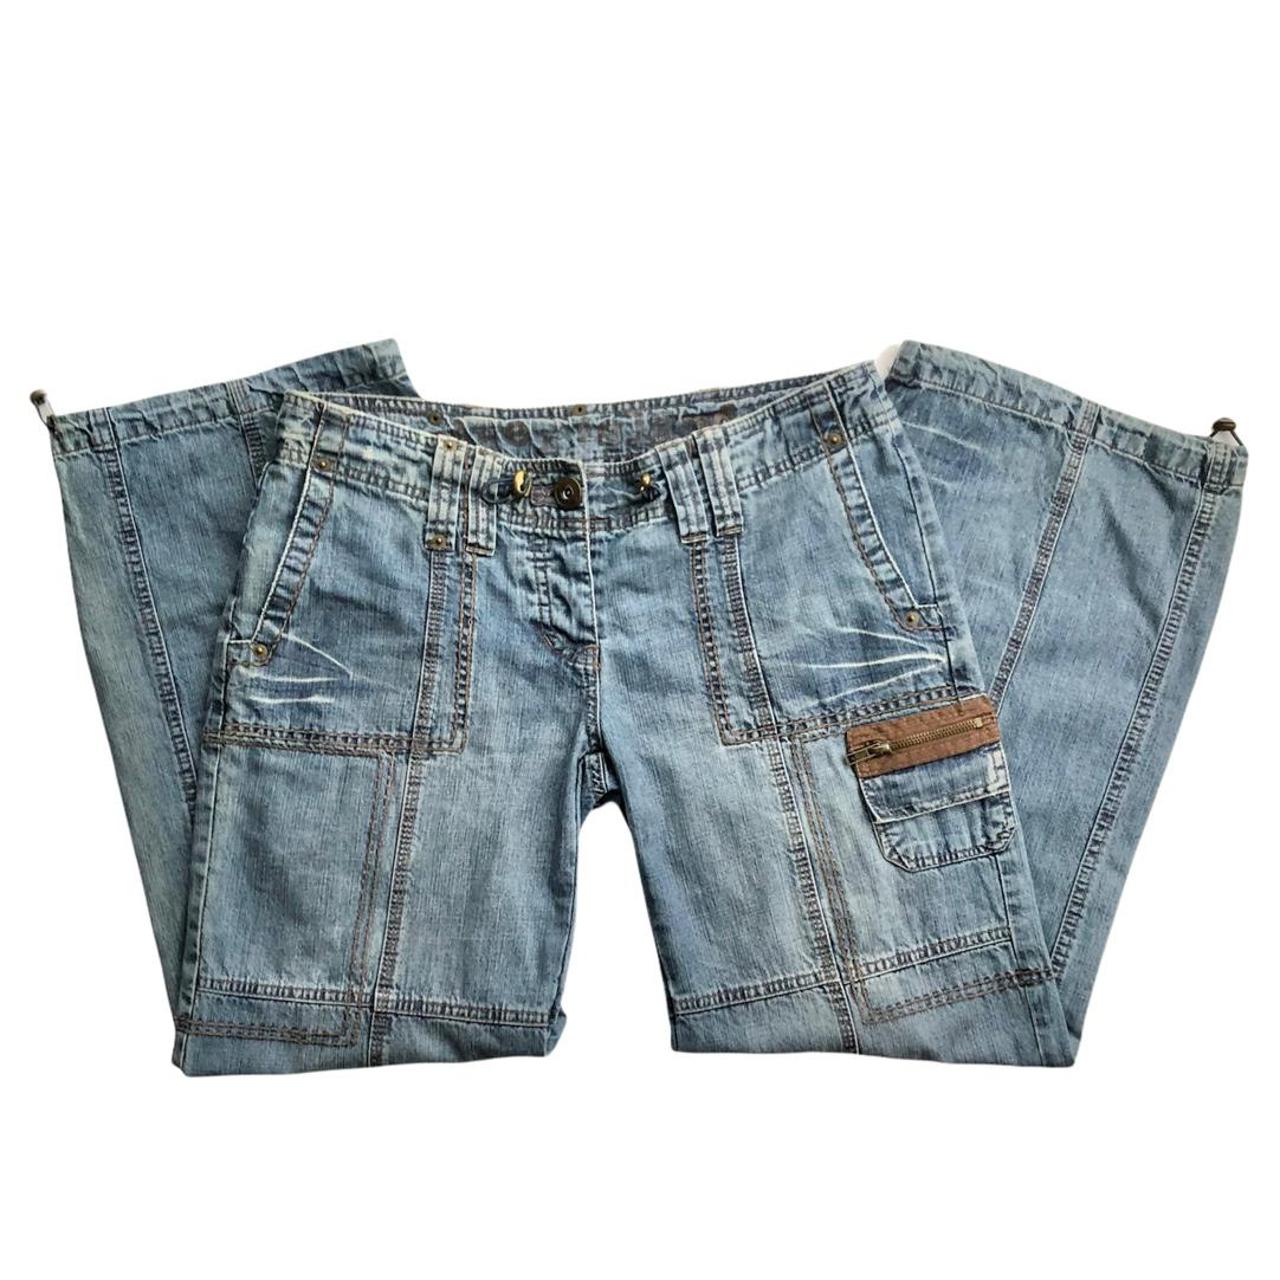 Product Image 1 - Y2k jeans, cargo style low